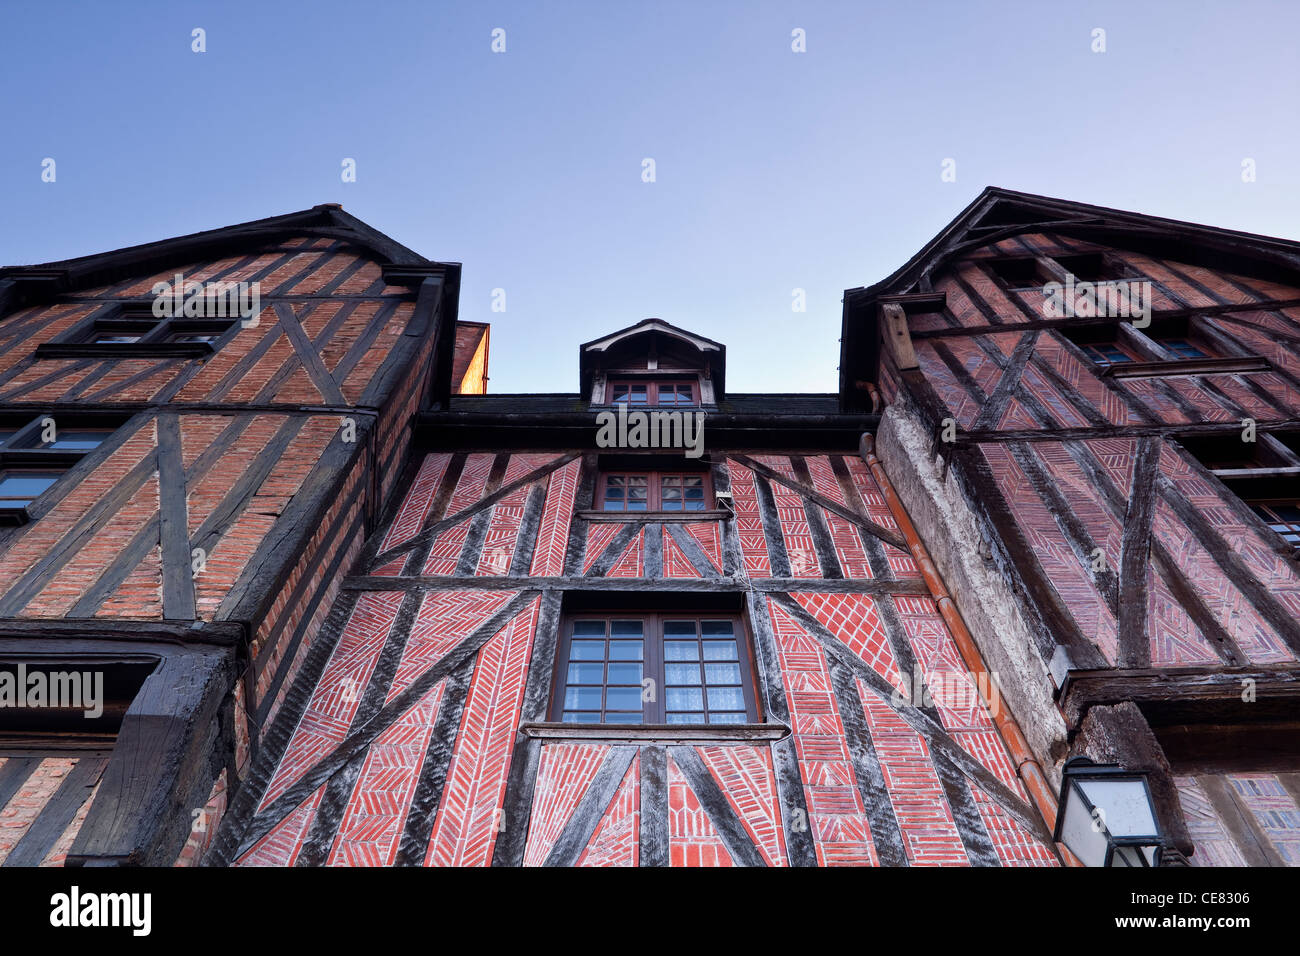 Looking up at one of the wood beamed houses at Place Plumereau in Tours, France. Stock Photo